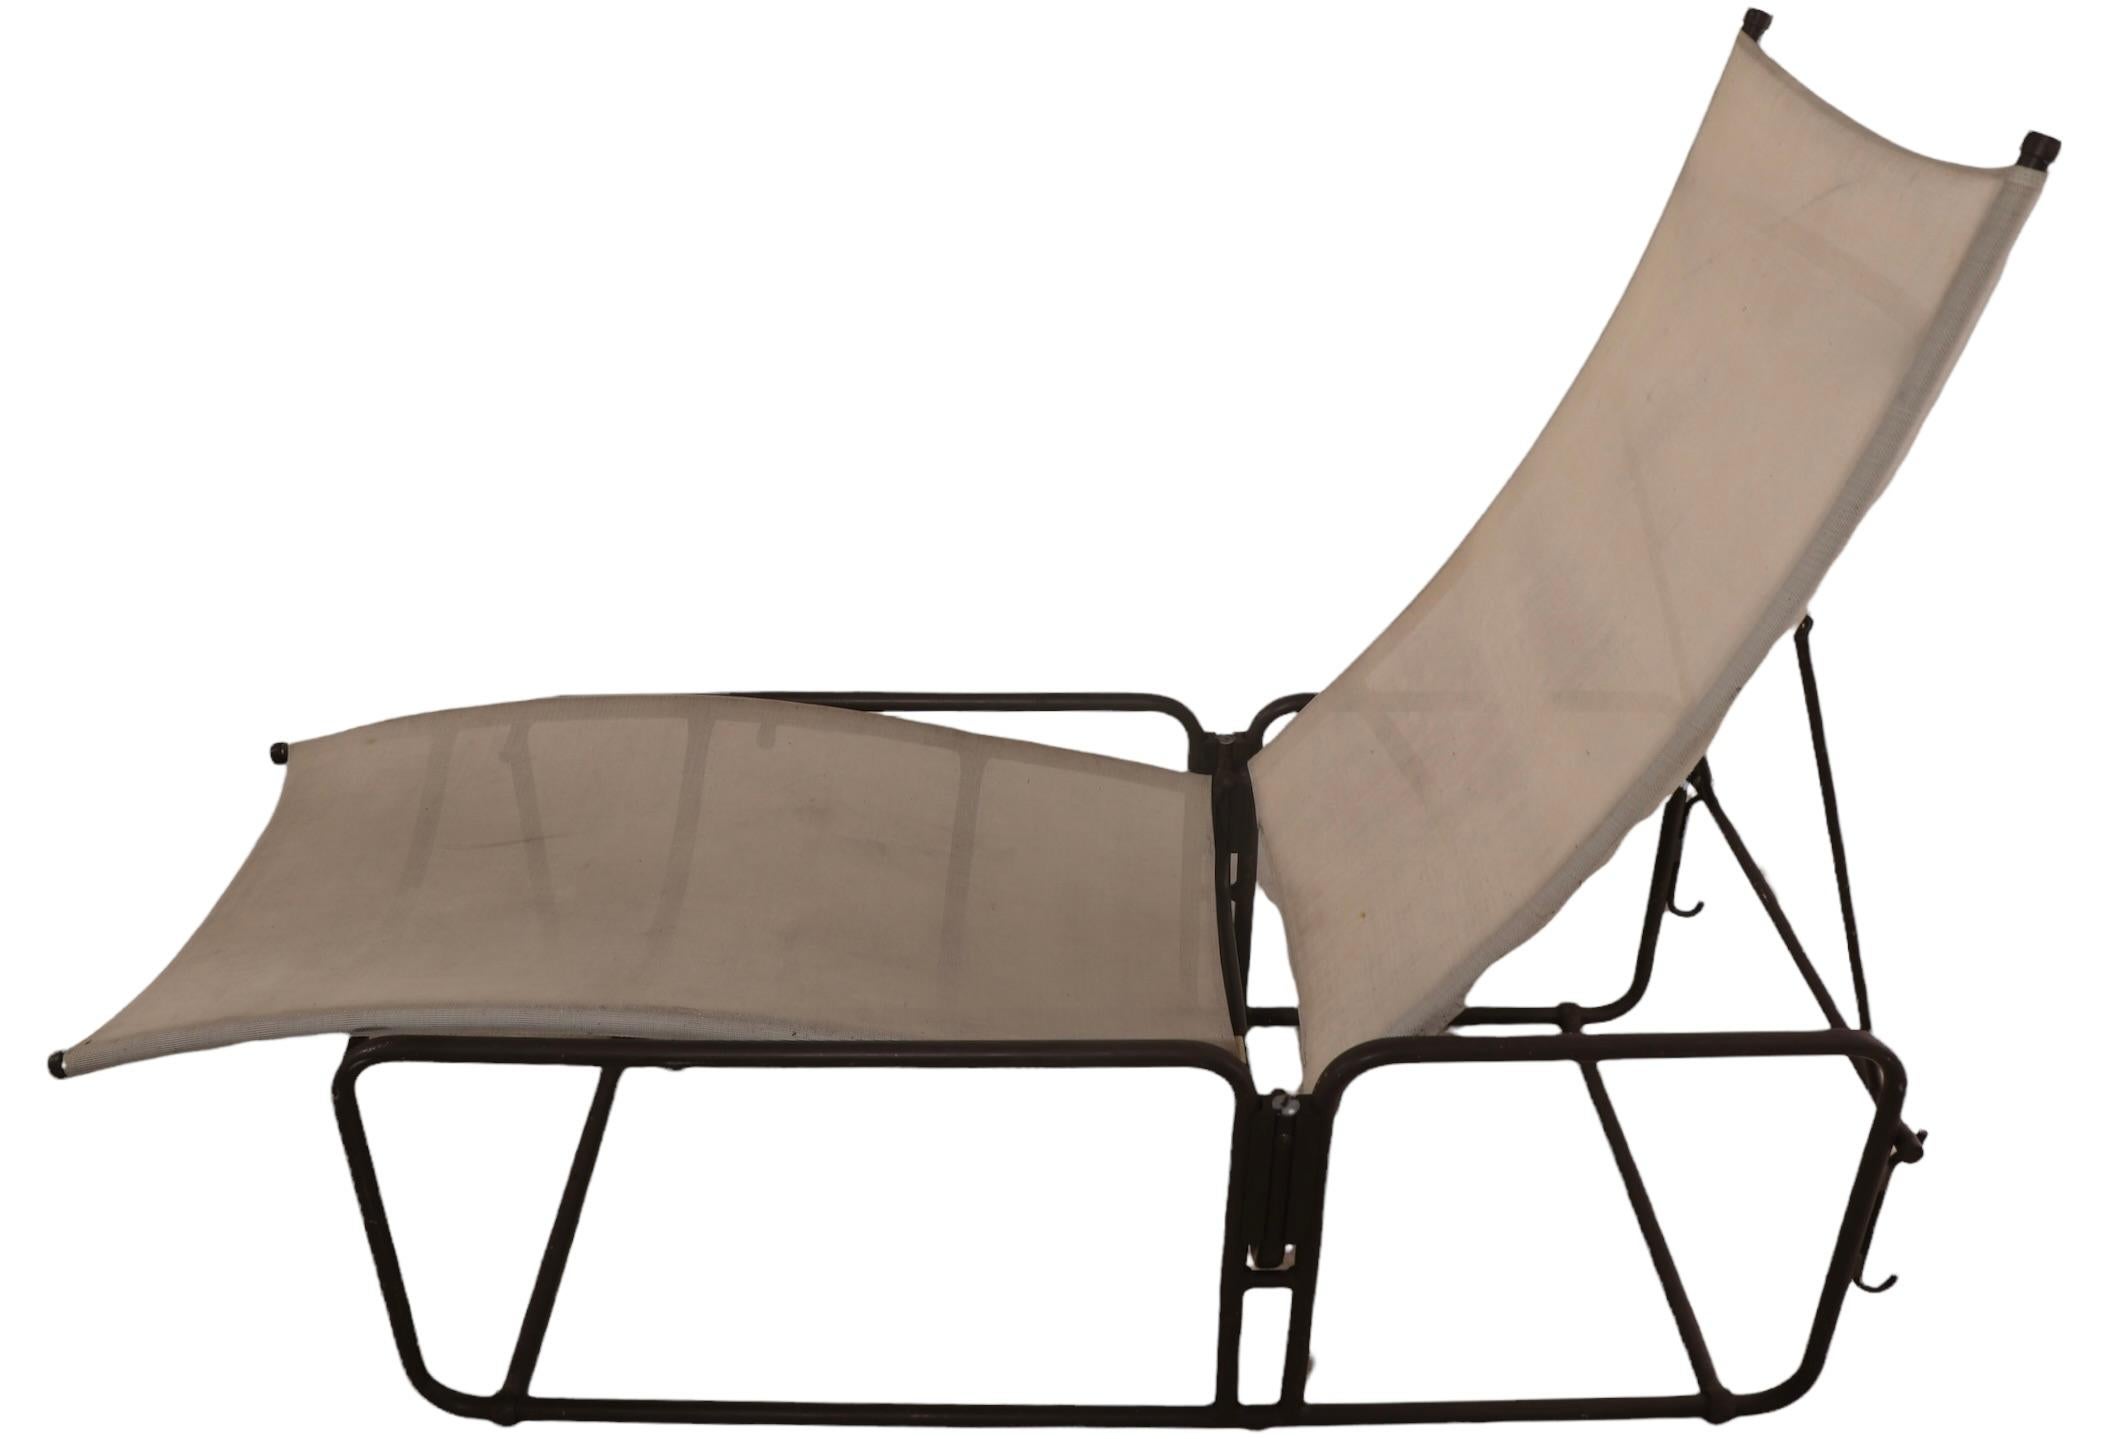  Brown Jordan Nomad Garden Patio Poolside Chaise Lounge Ca. 1970's In Good Condition For Sale In New York, NY